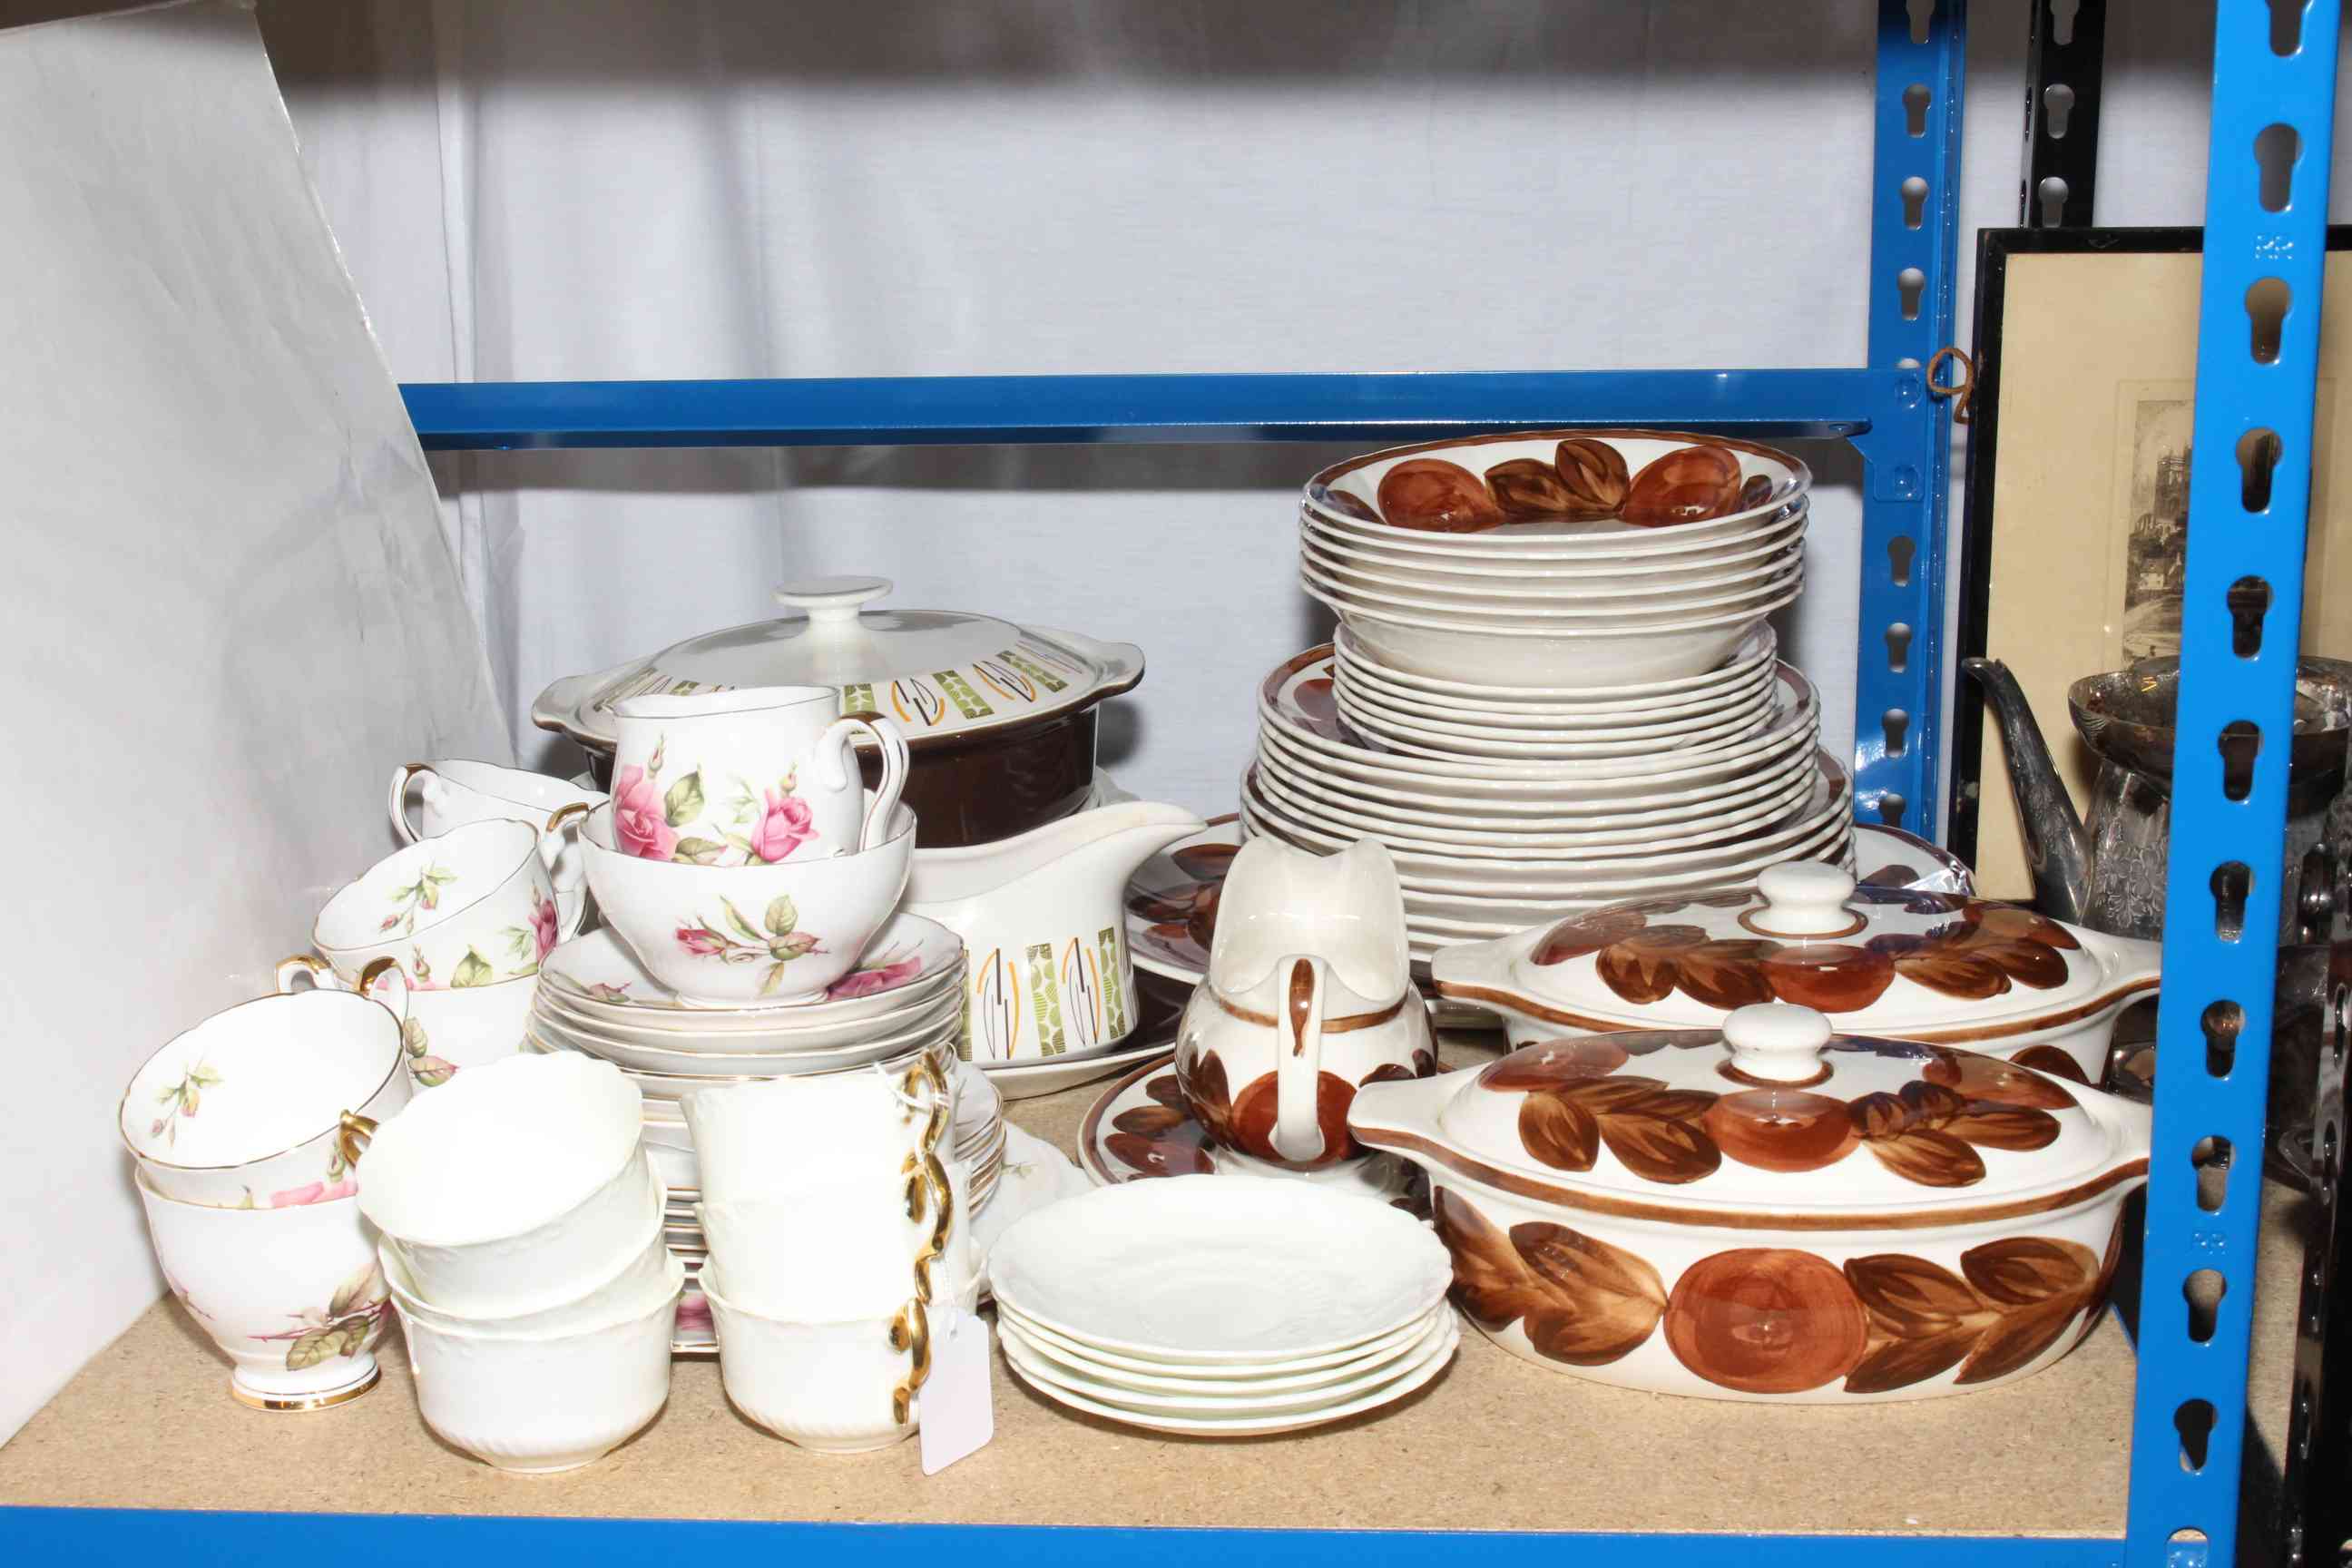 Simpson's Stockholm and Beswick 'Lunar' dinnerware, Royal Stafford 'First Love' and other teaware.